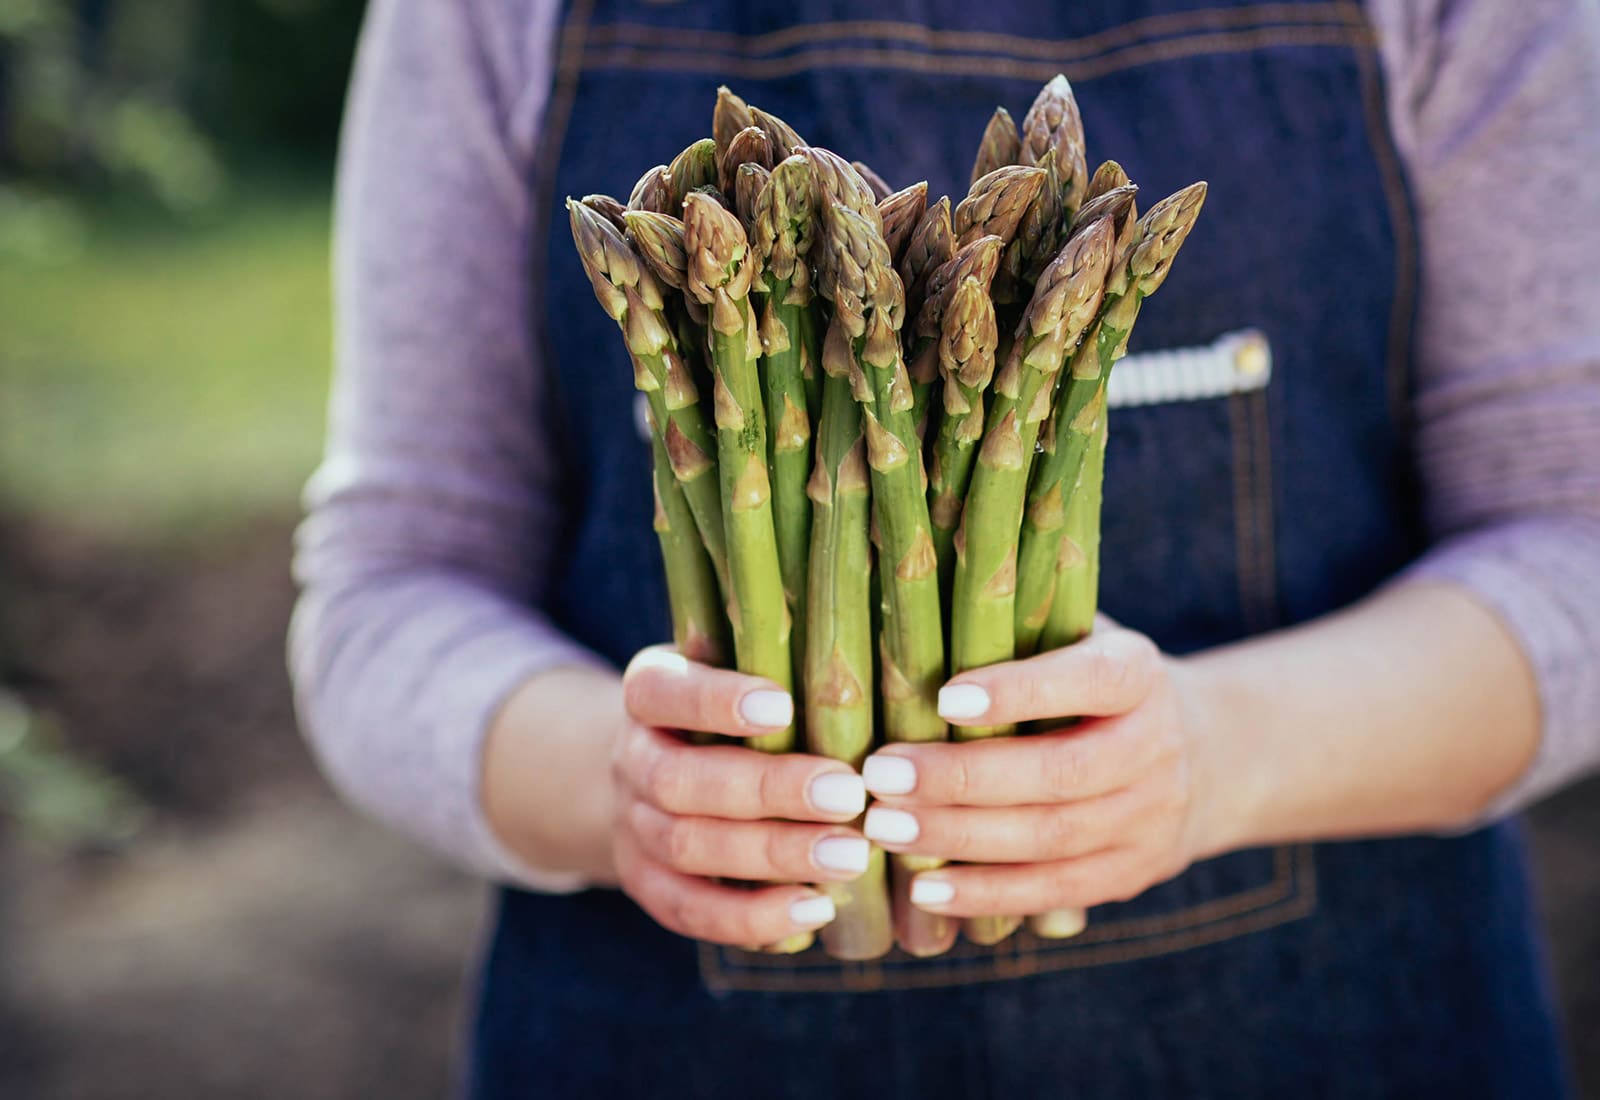 Woman's hands holding bundle of green asparagus spears in a garden